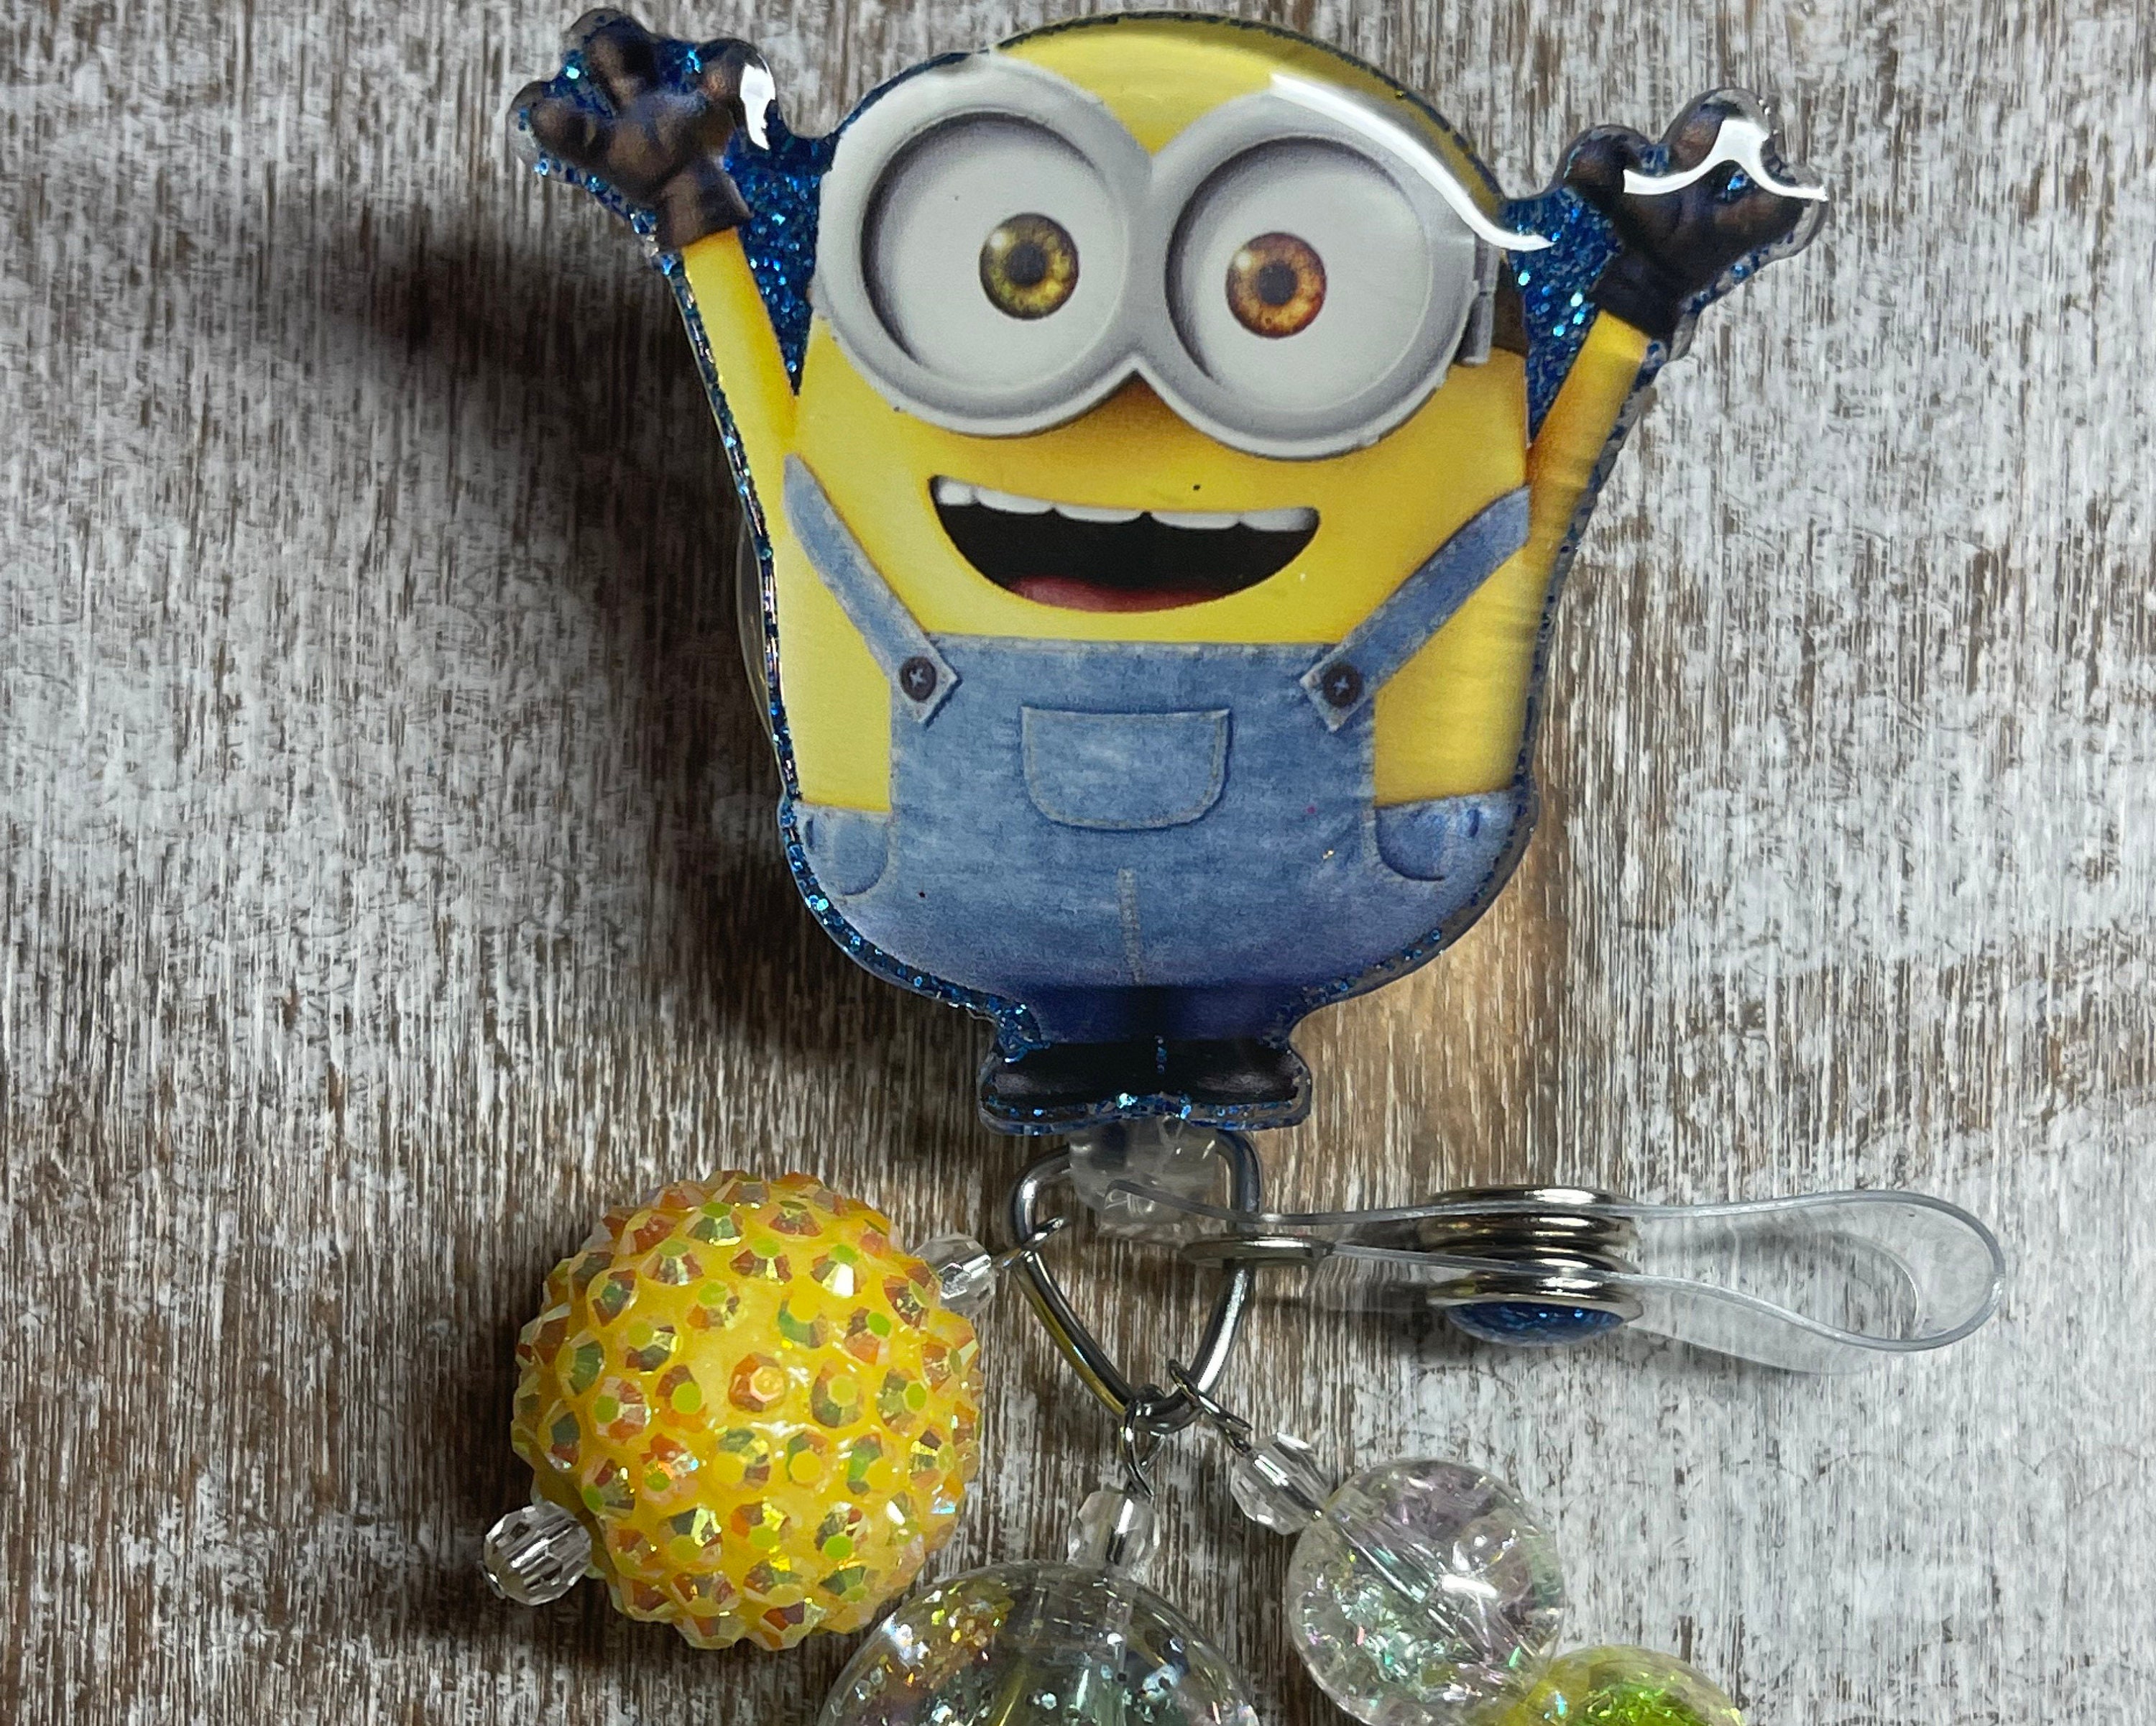 NEW Minion Card Holder Retractable, Despicable Me, Work School ID Badge, USA